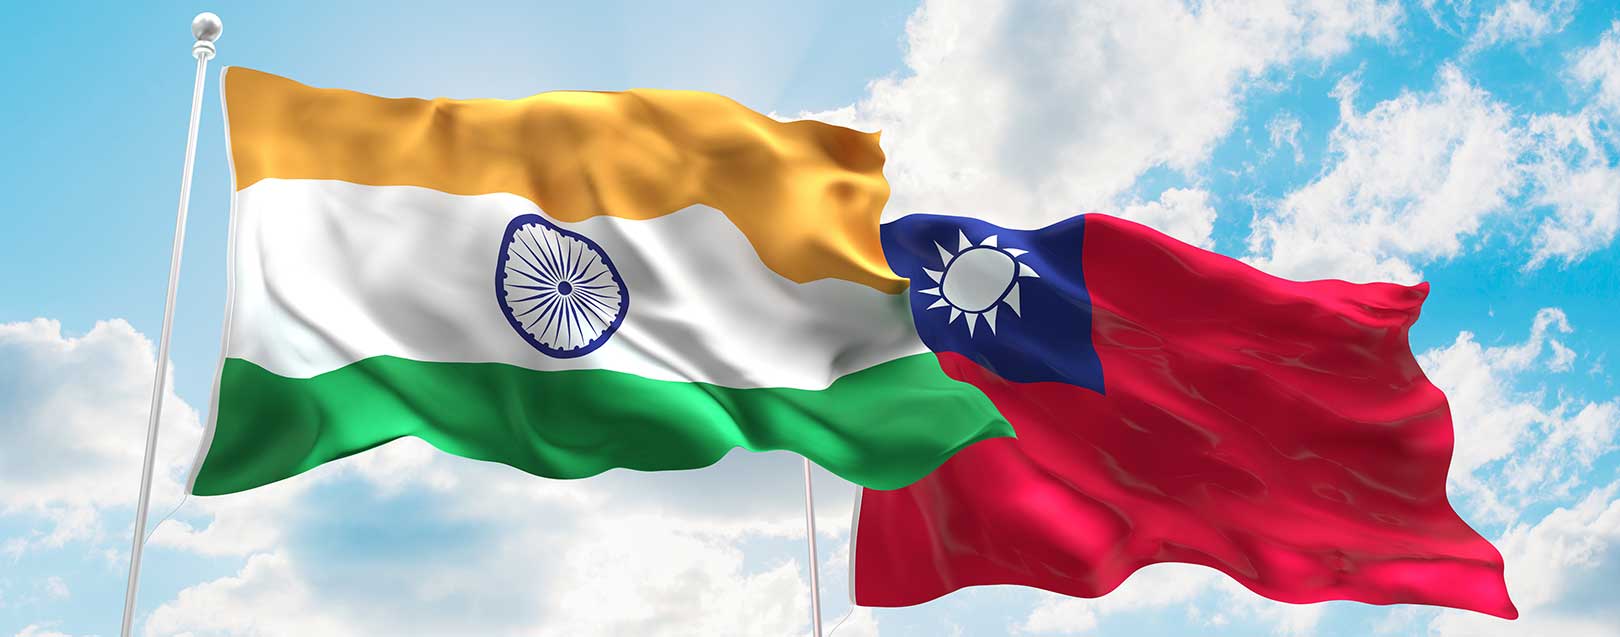 Taiwanese firms willing to explore Indian market